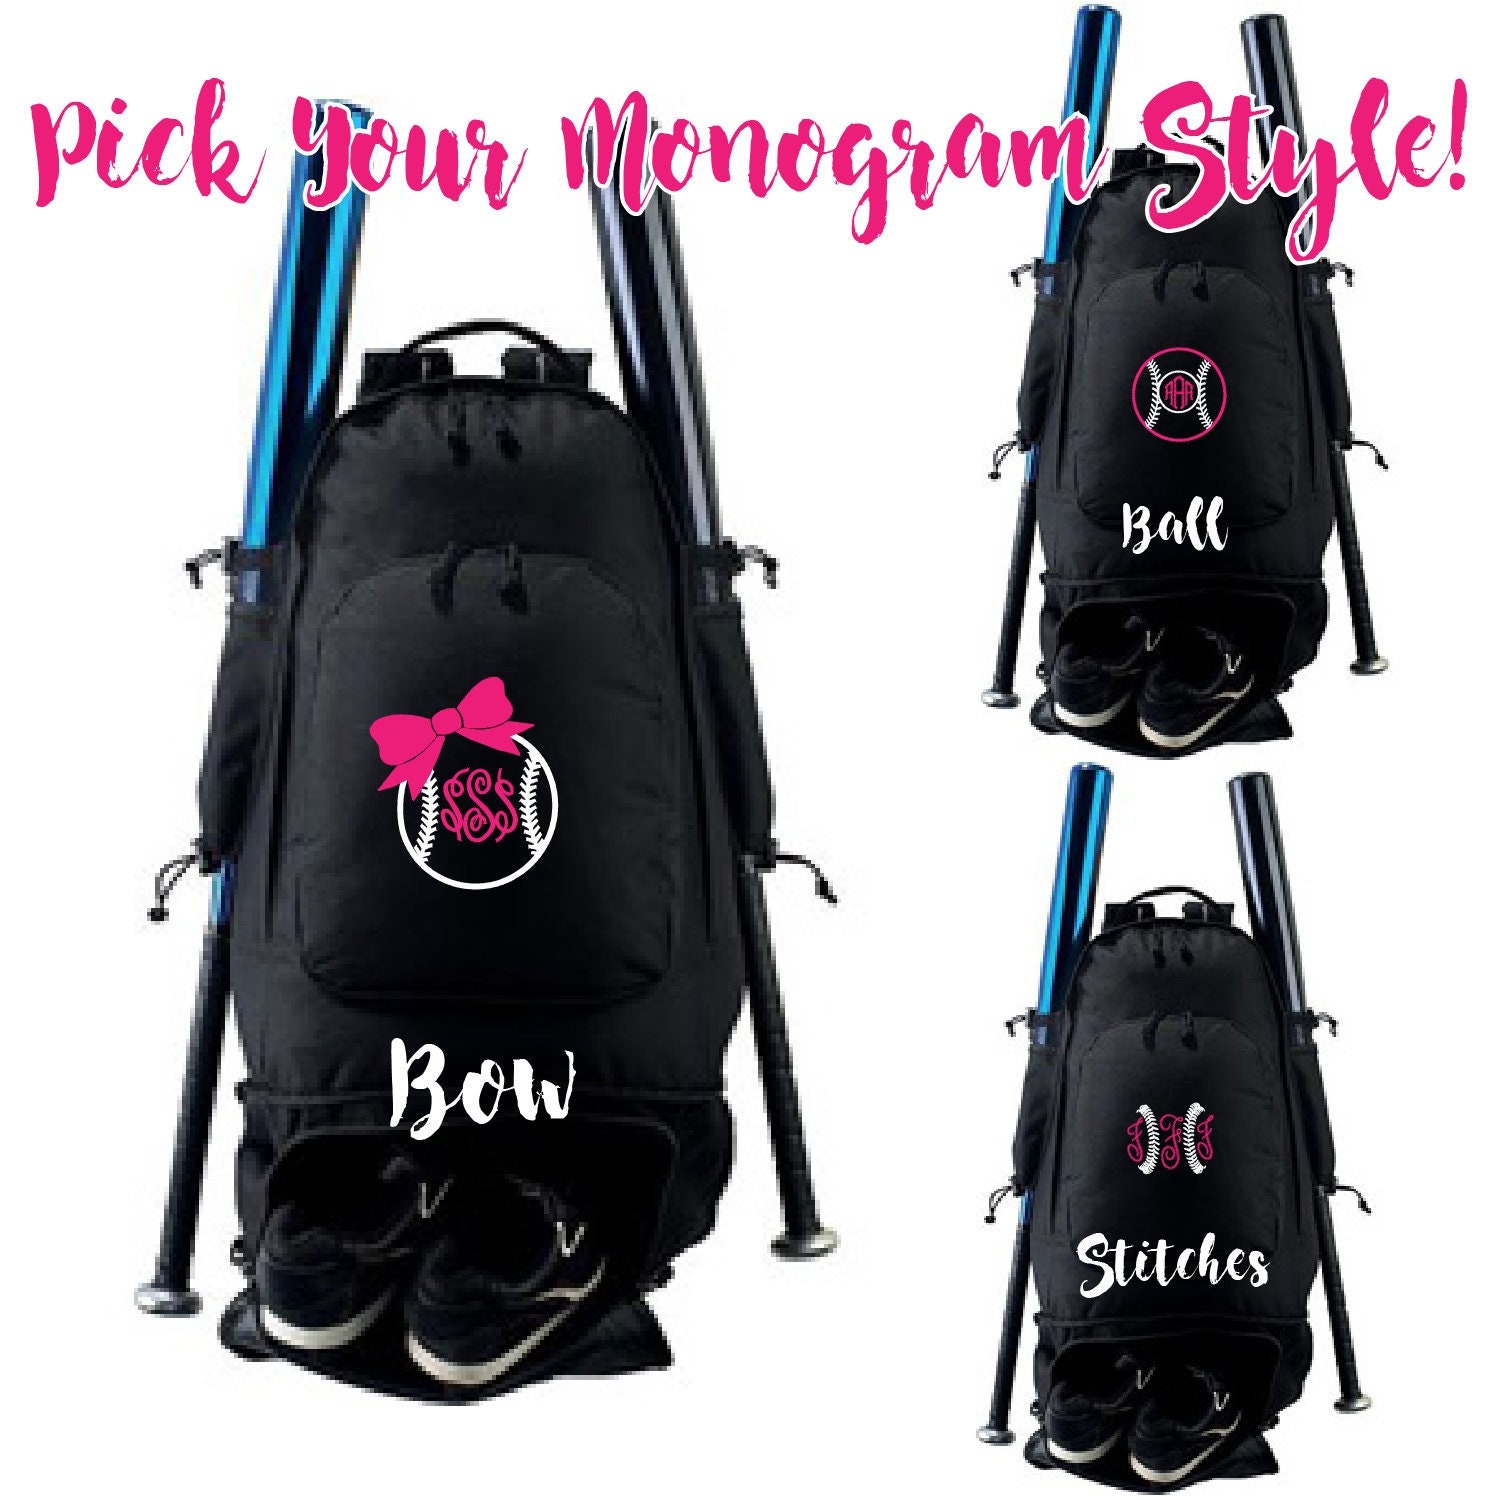 Softball Sports Personalized Embroidered Monogram Backpack